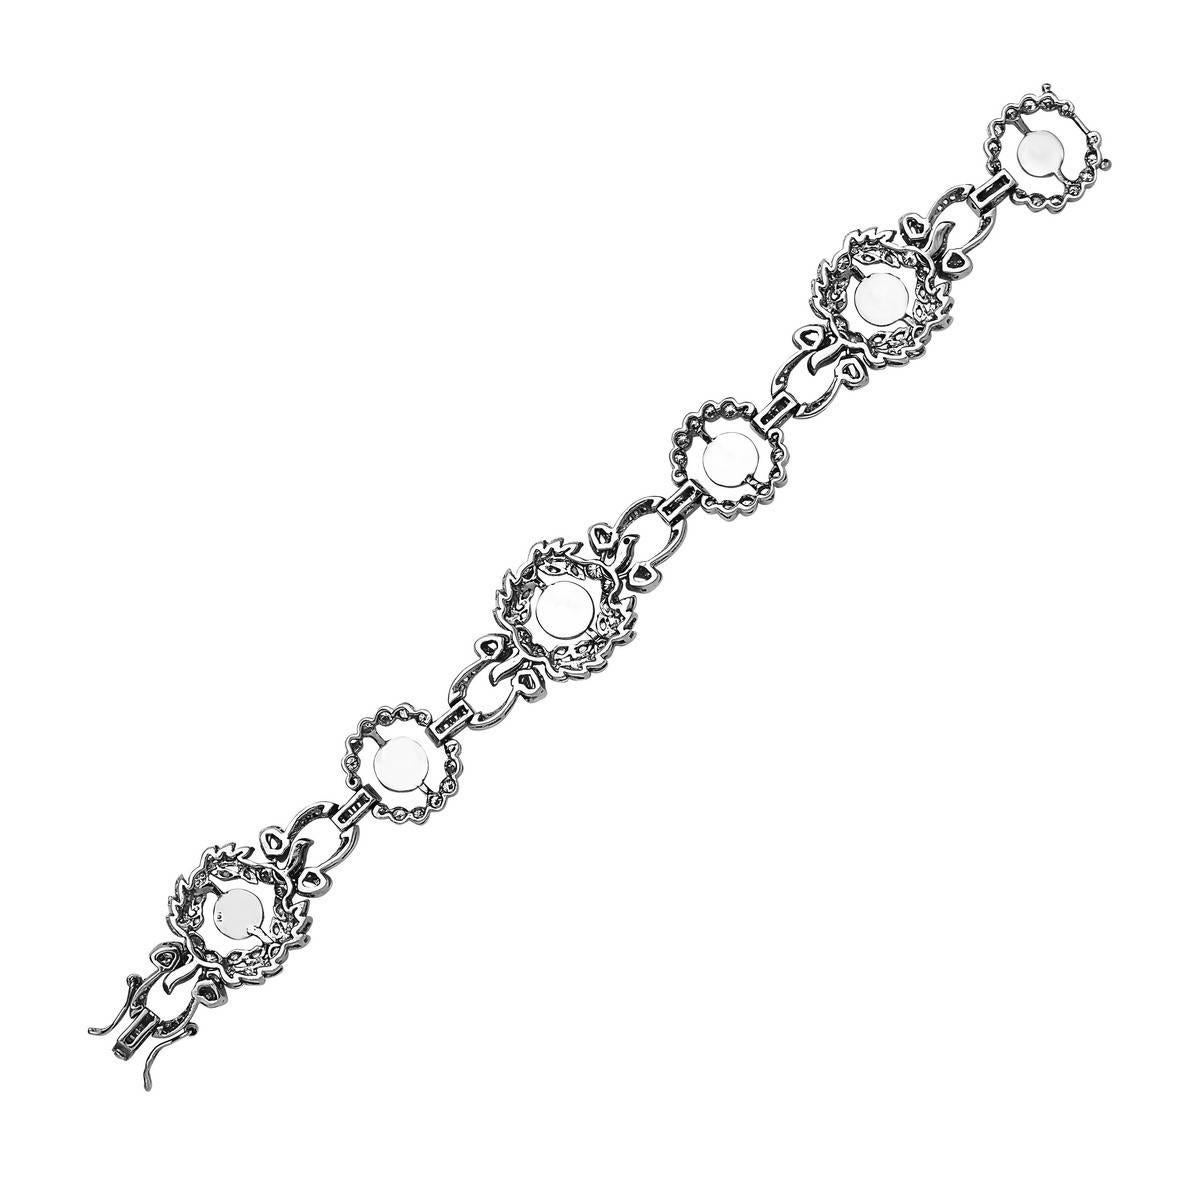 Antique looking diamond bracelet with floral motifs with clasp closure in 18K white Gold.

18k:33.52g,D:5.51ct